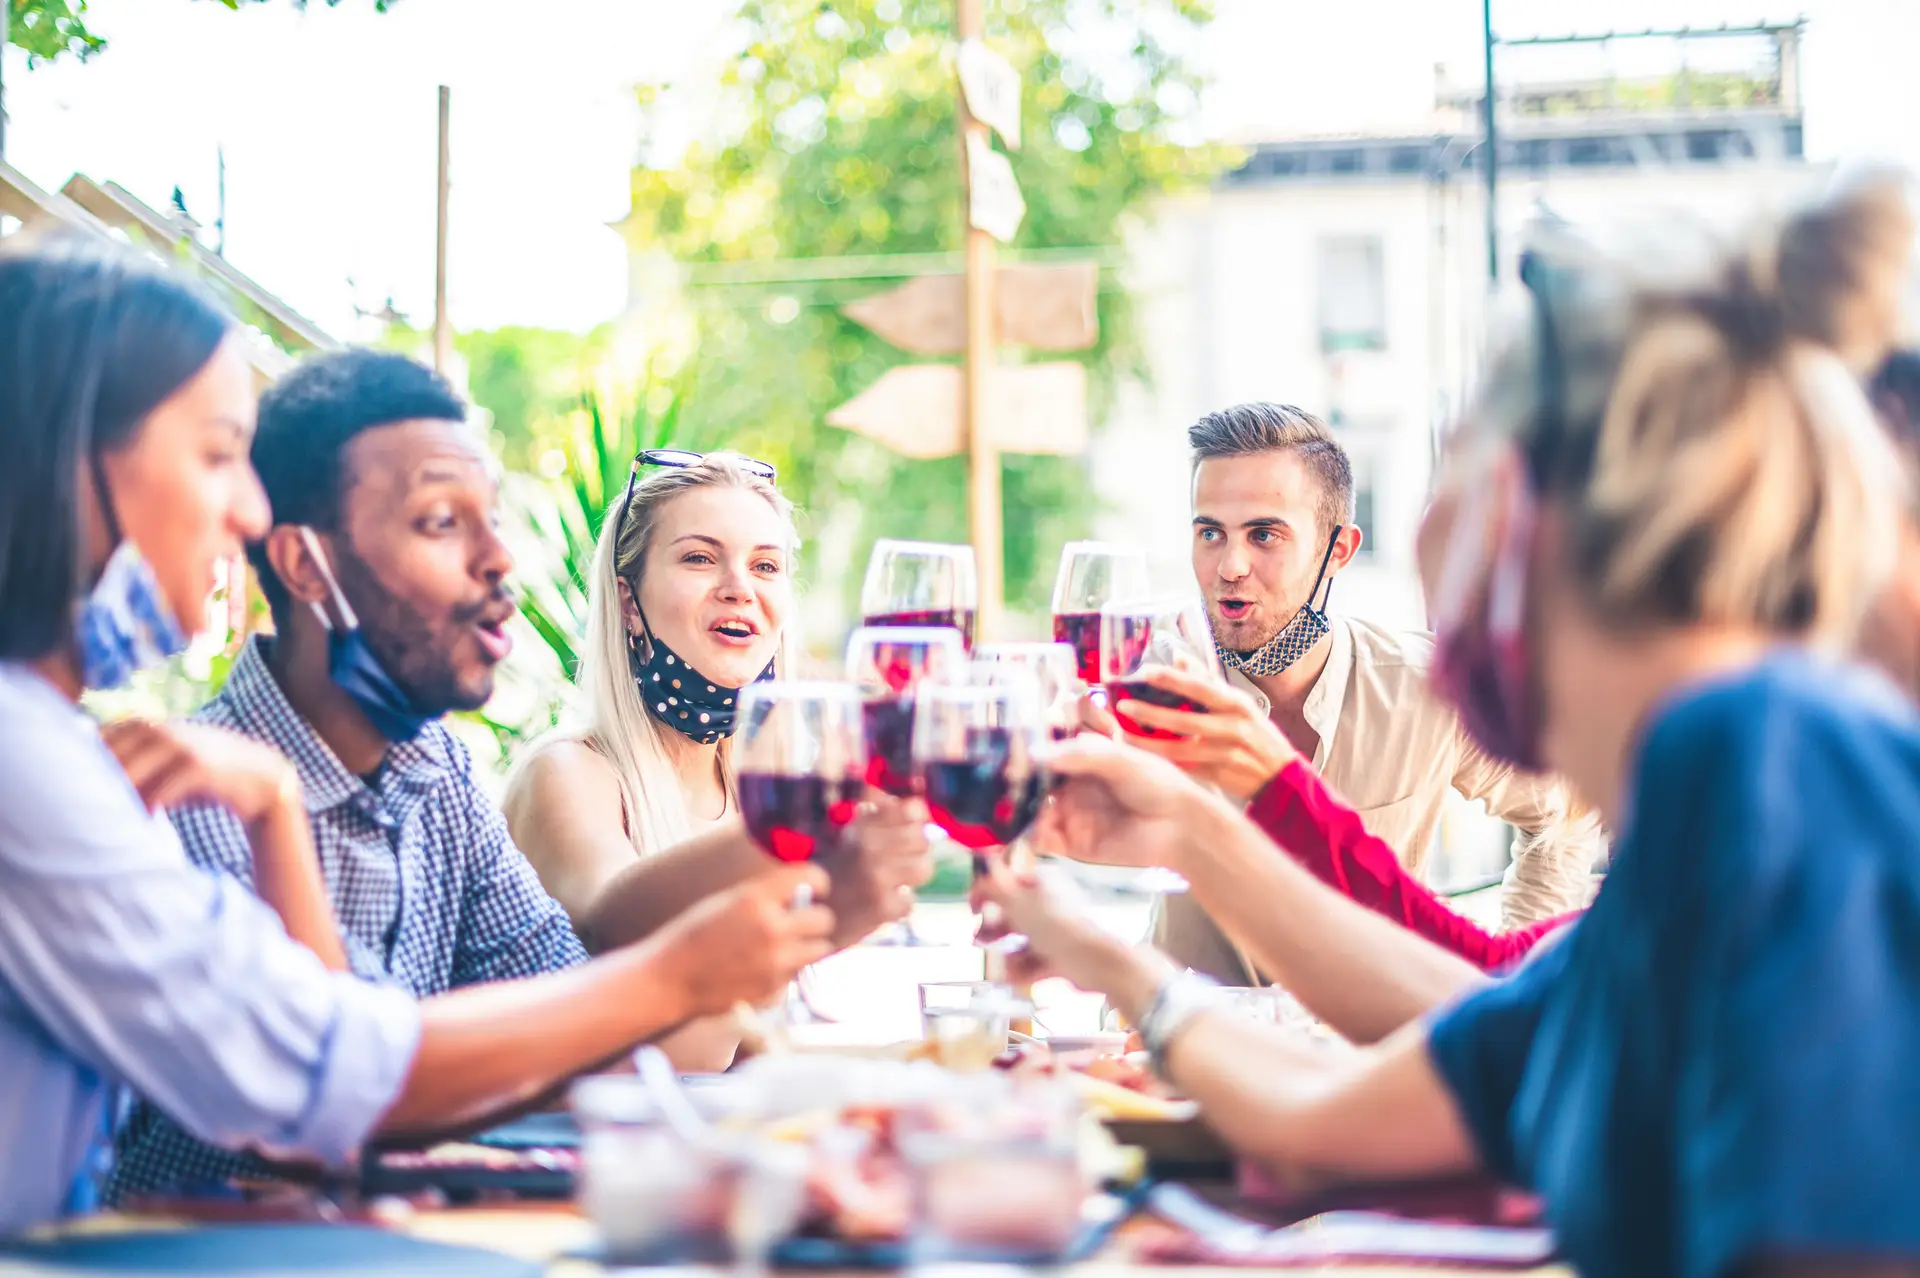 Friends toasting red wine at outdoor restaurant bar with face mask down - New normal lifestyle concept with happy people having fun together - Focus on guys behind